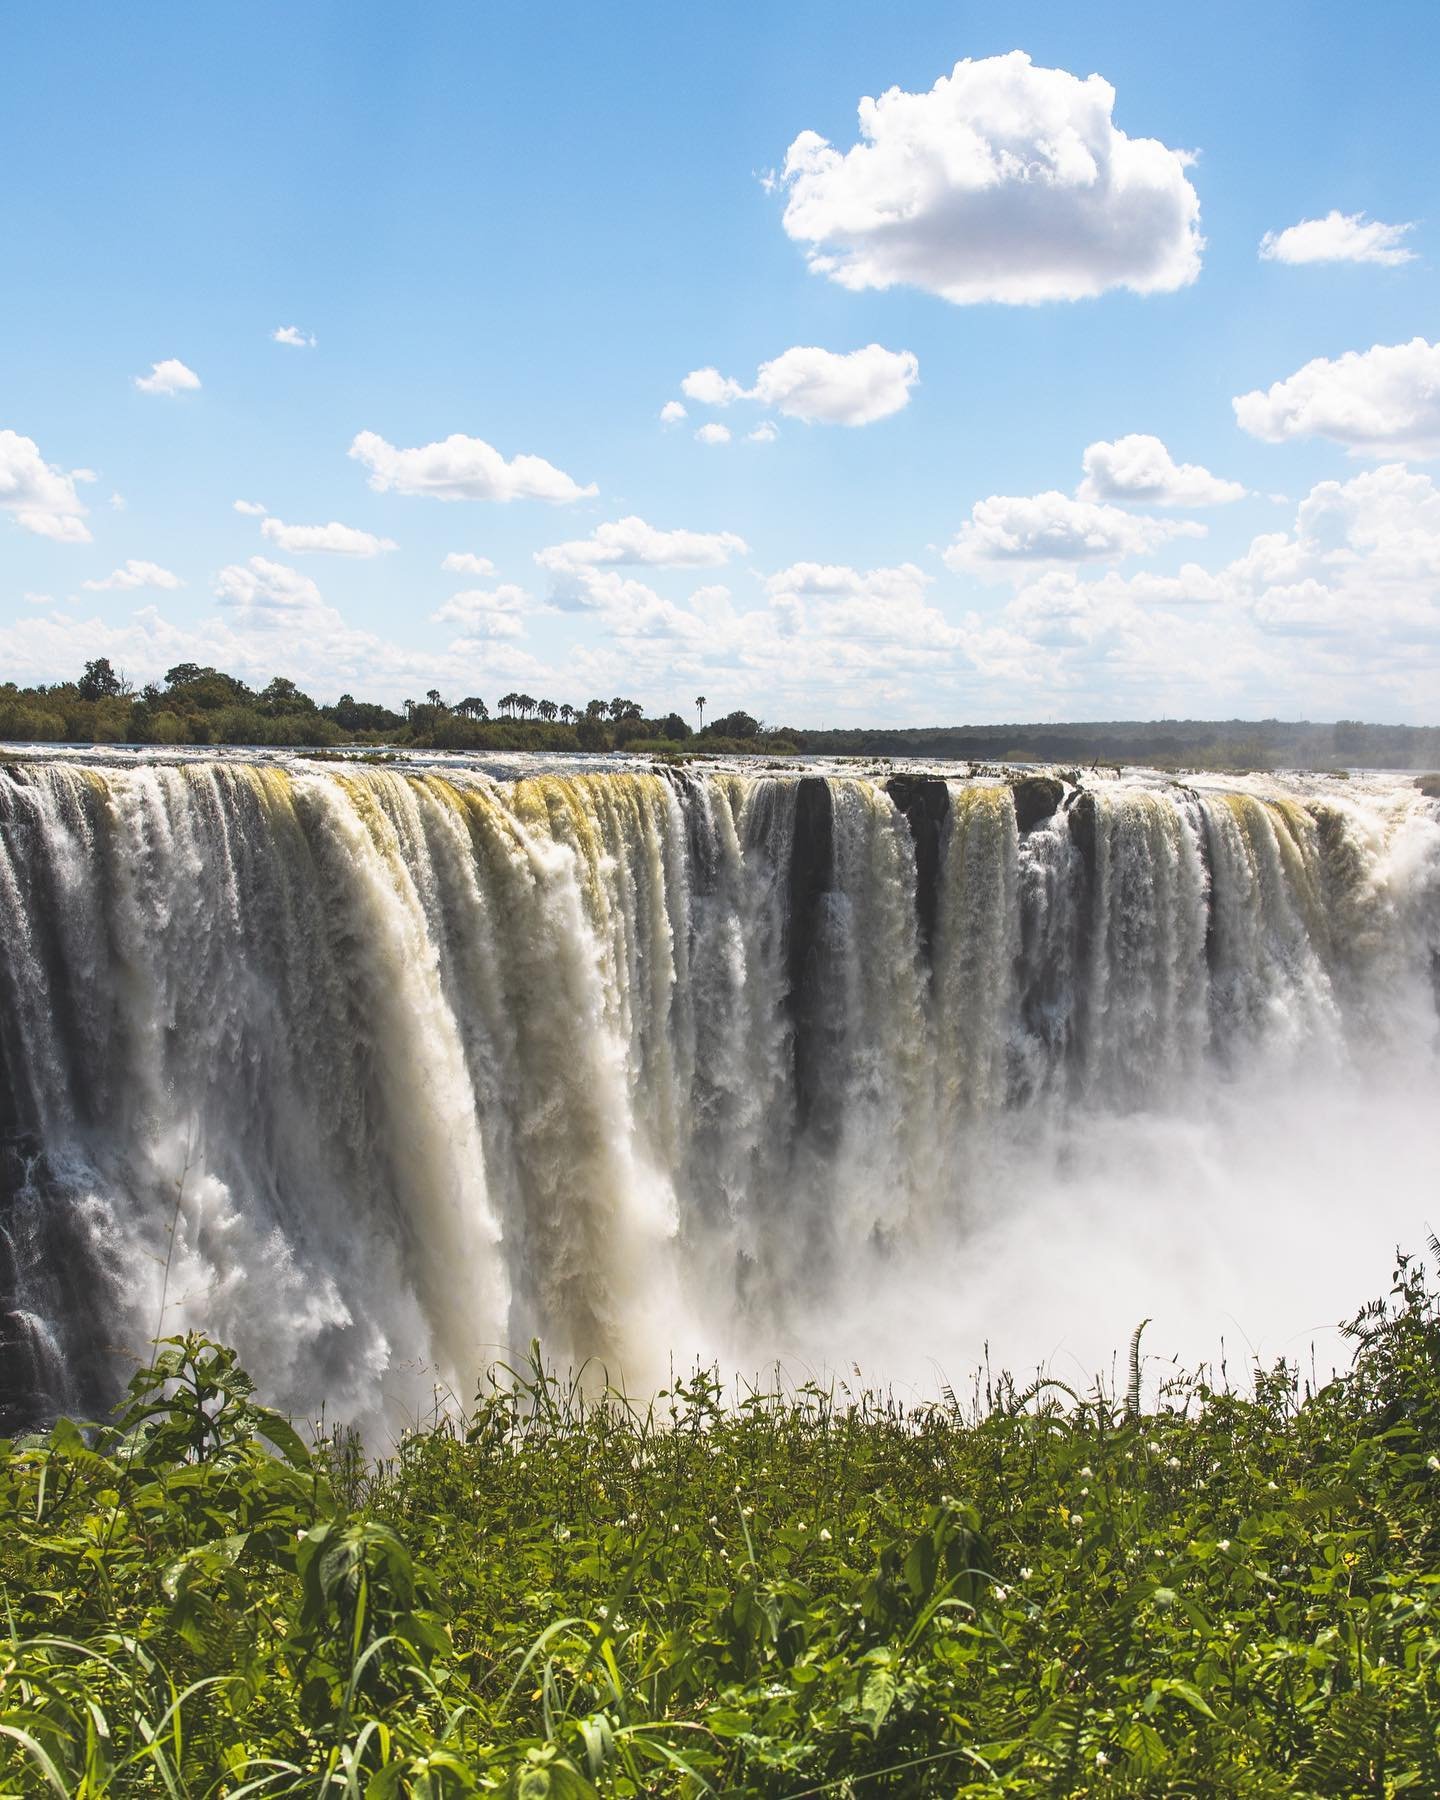 Victoria Falls as seen from the Zimbabwe side 🇿🇼